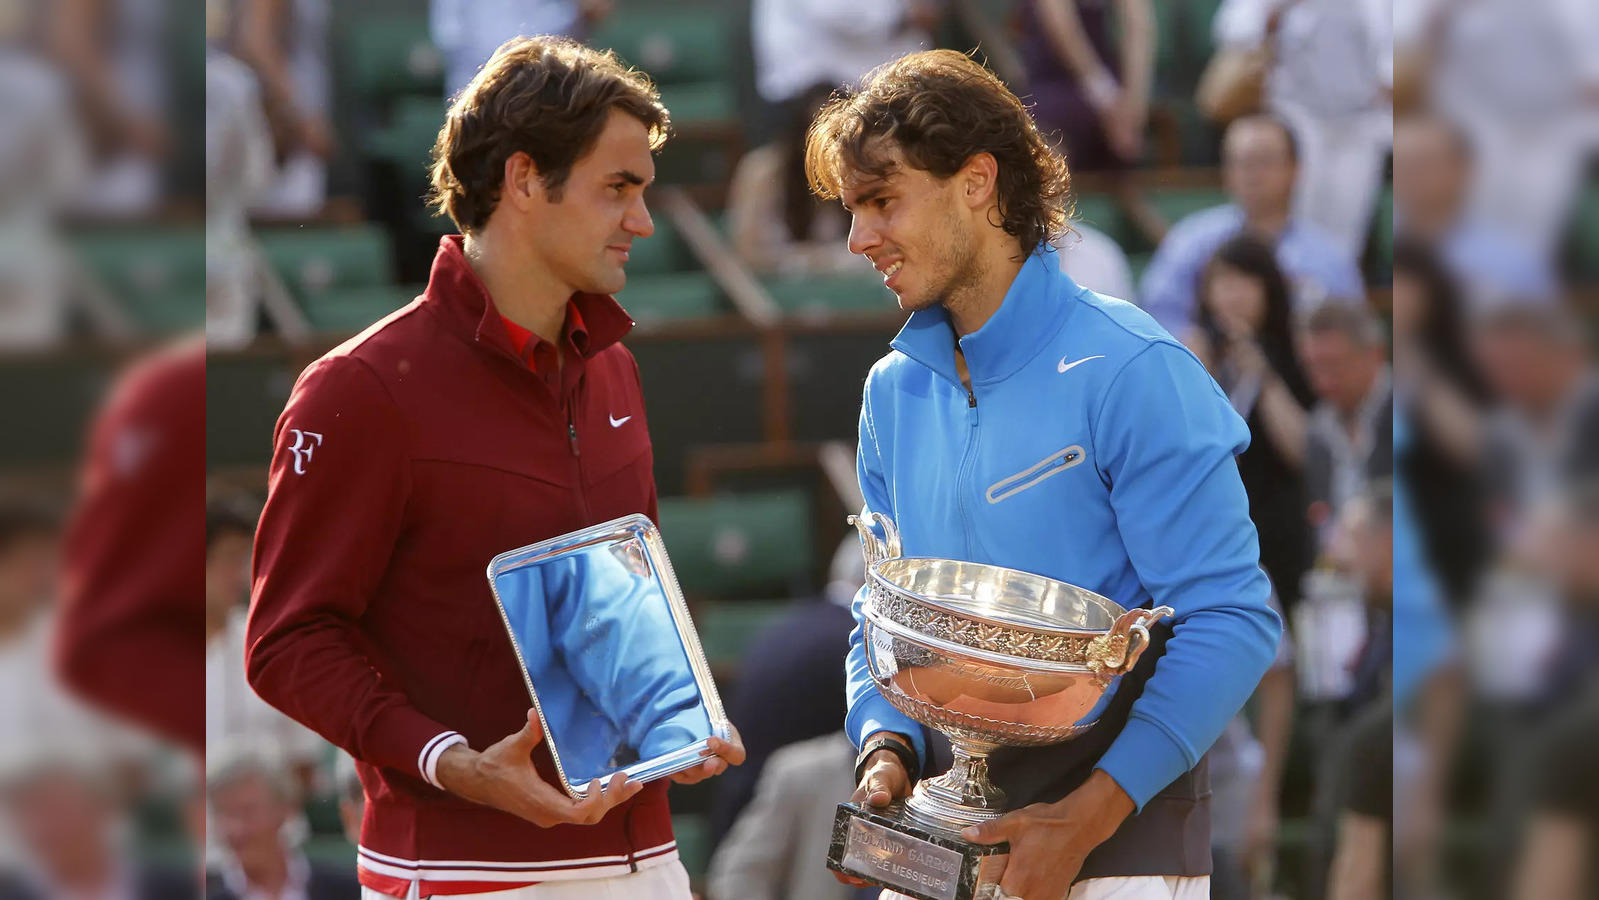 french open French Open starts May 28 Heres full schedule, timings, how to watch on TV, live stream